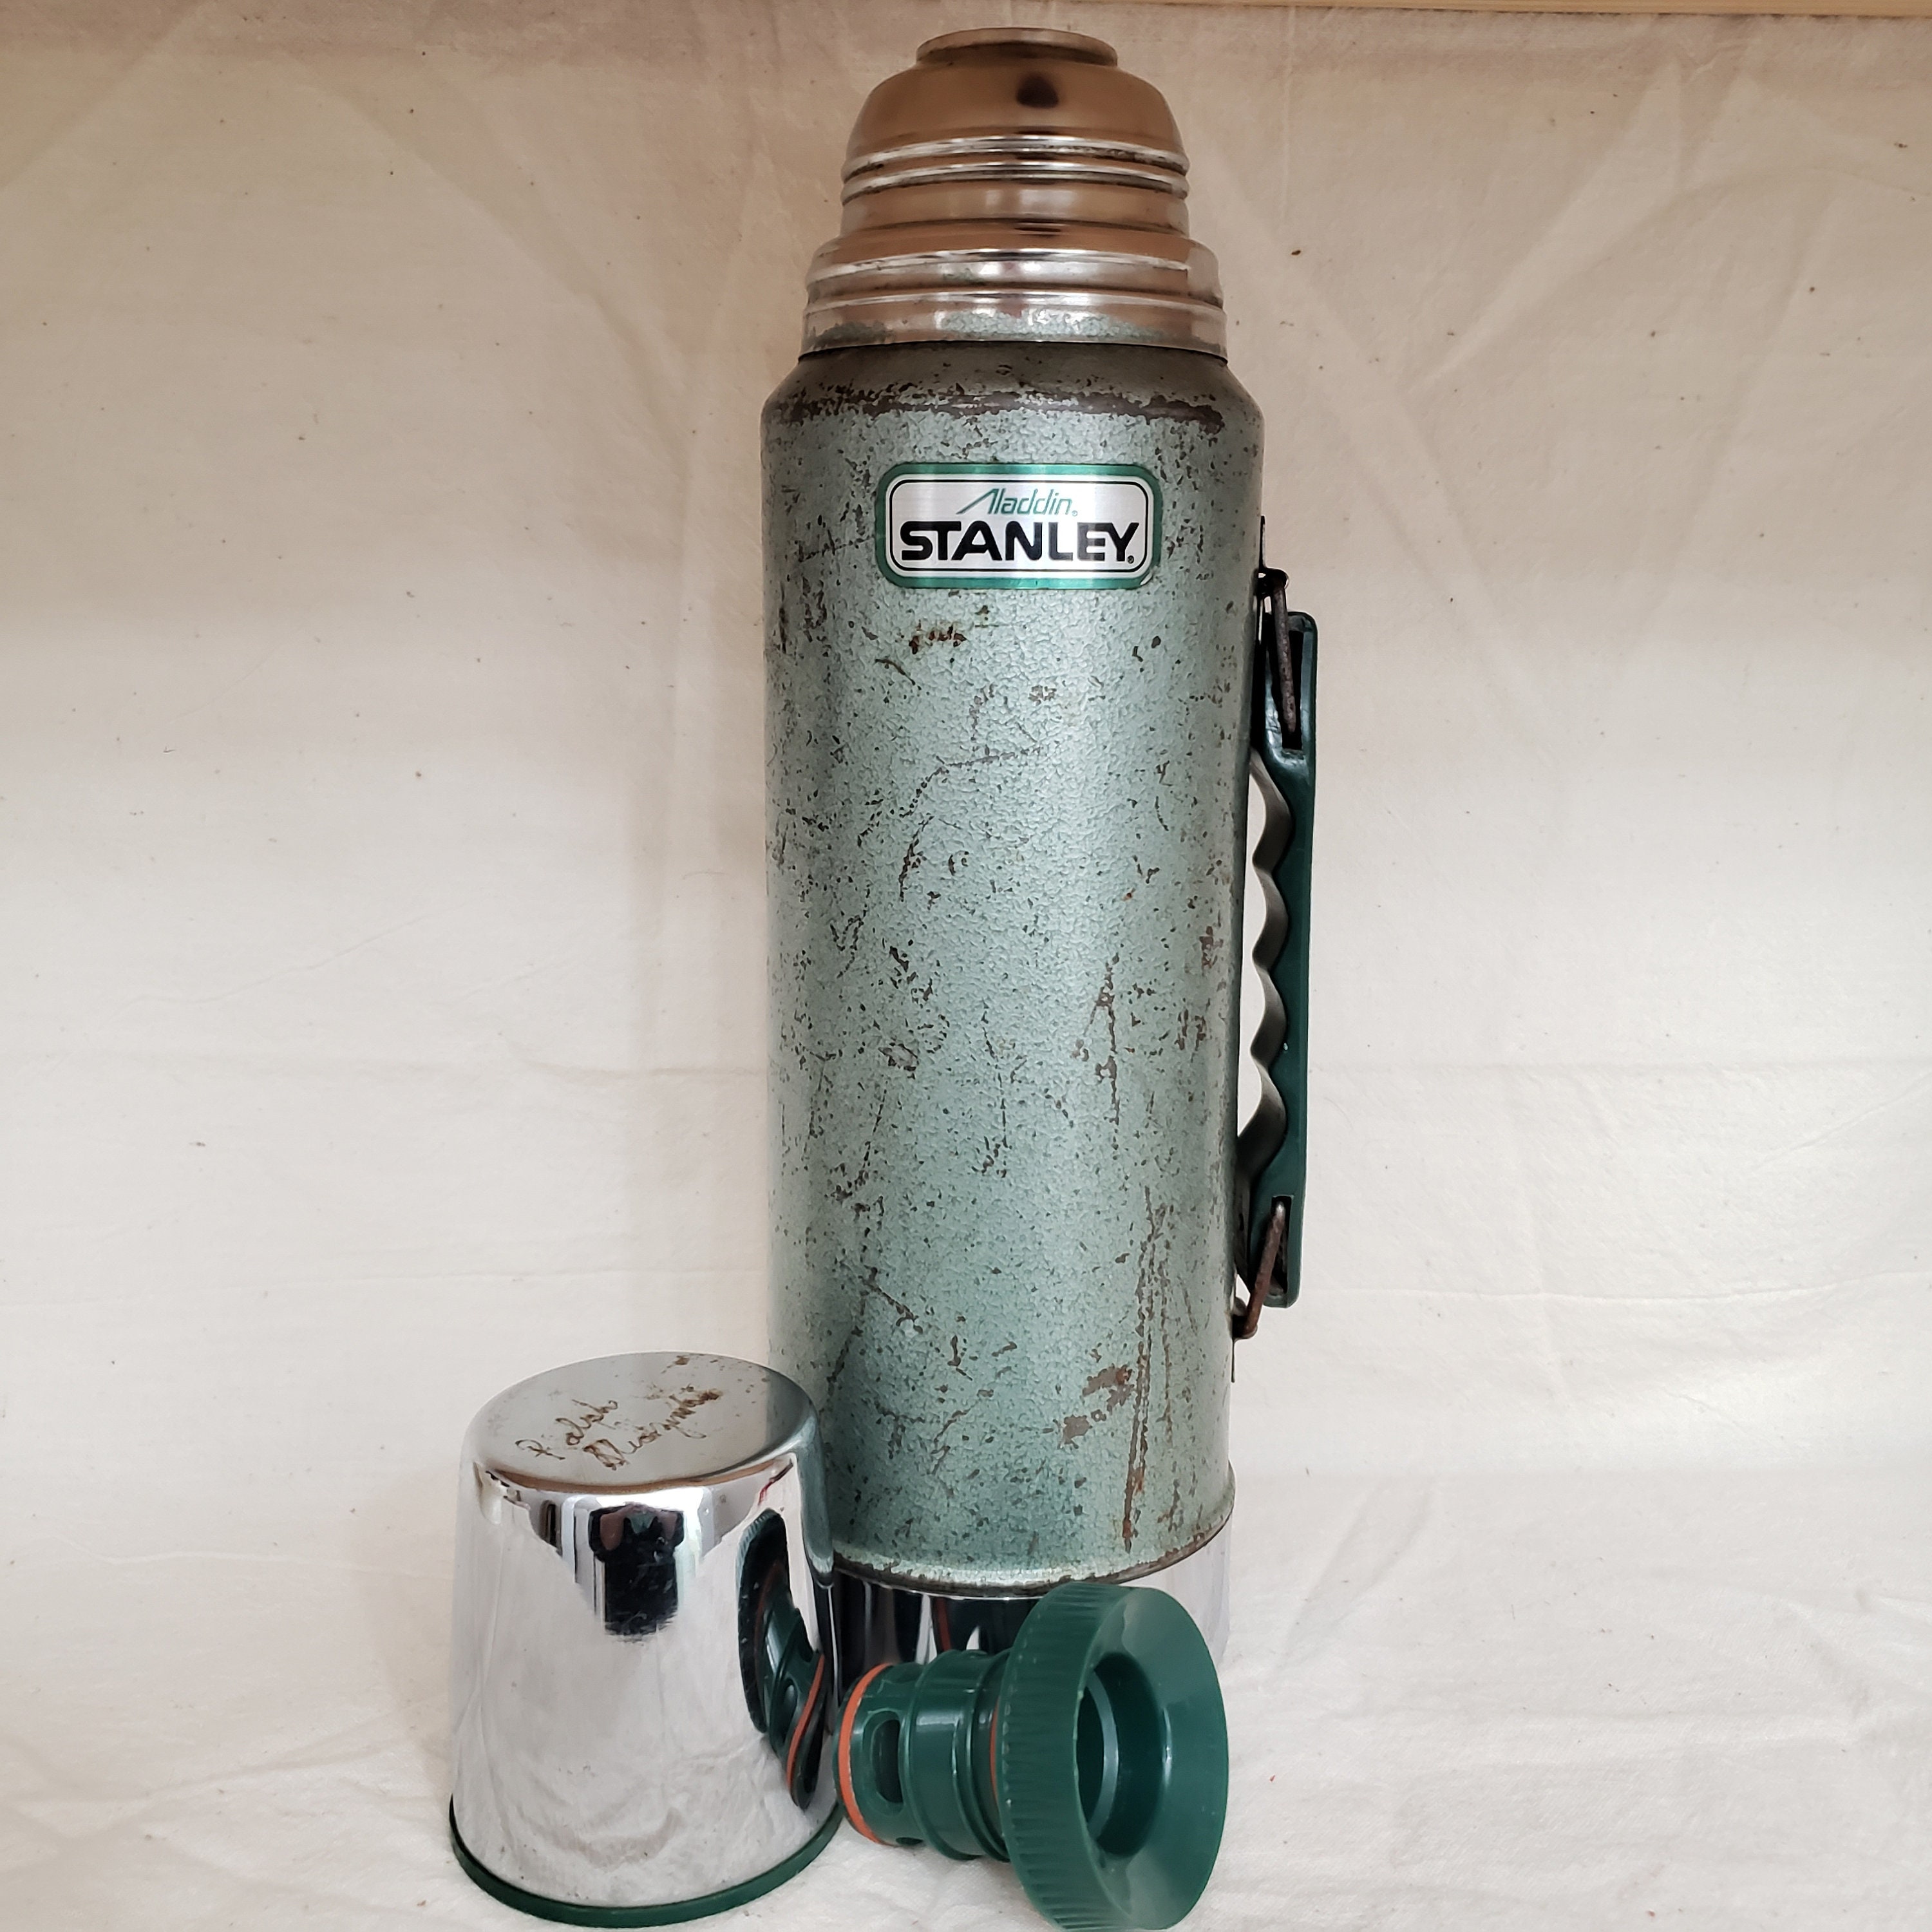 Classic Green Stanley Stainless Aladdin Steel Thermos Mug 24 oz. Vintage  Coffee